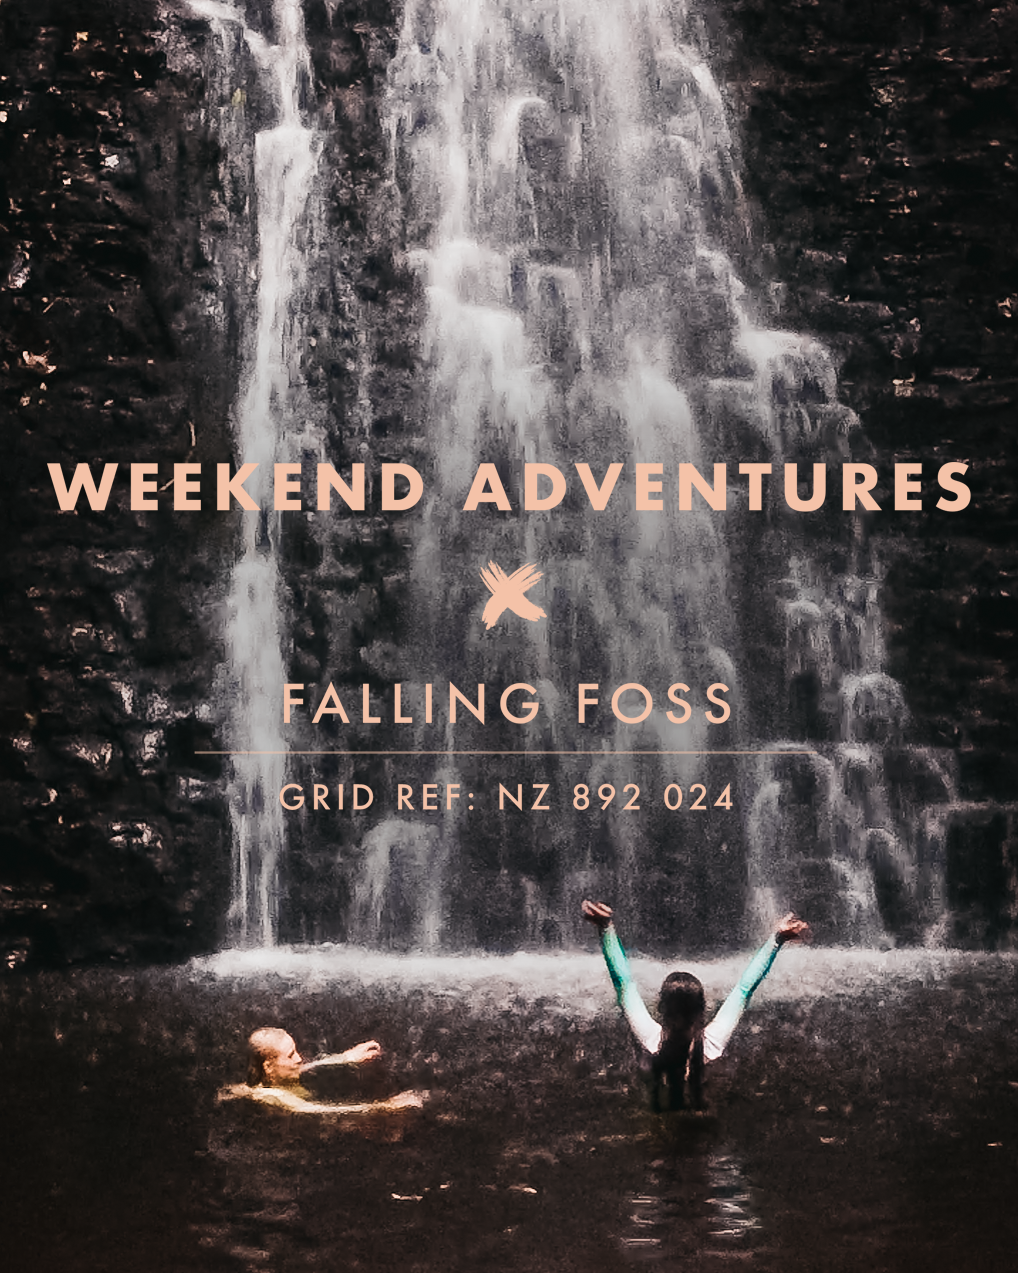 WEEKEND ADVENTURES: Wild swimming in a woodland waterfall